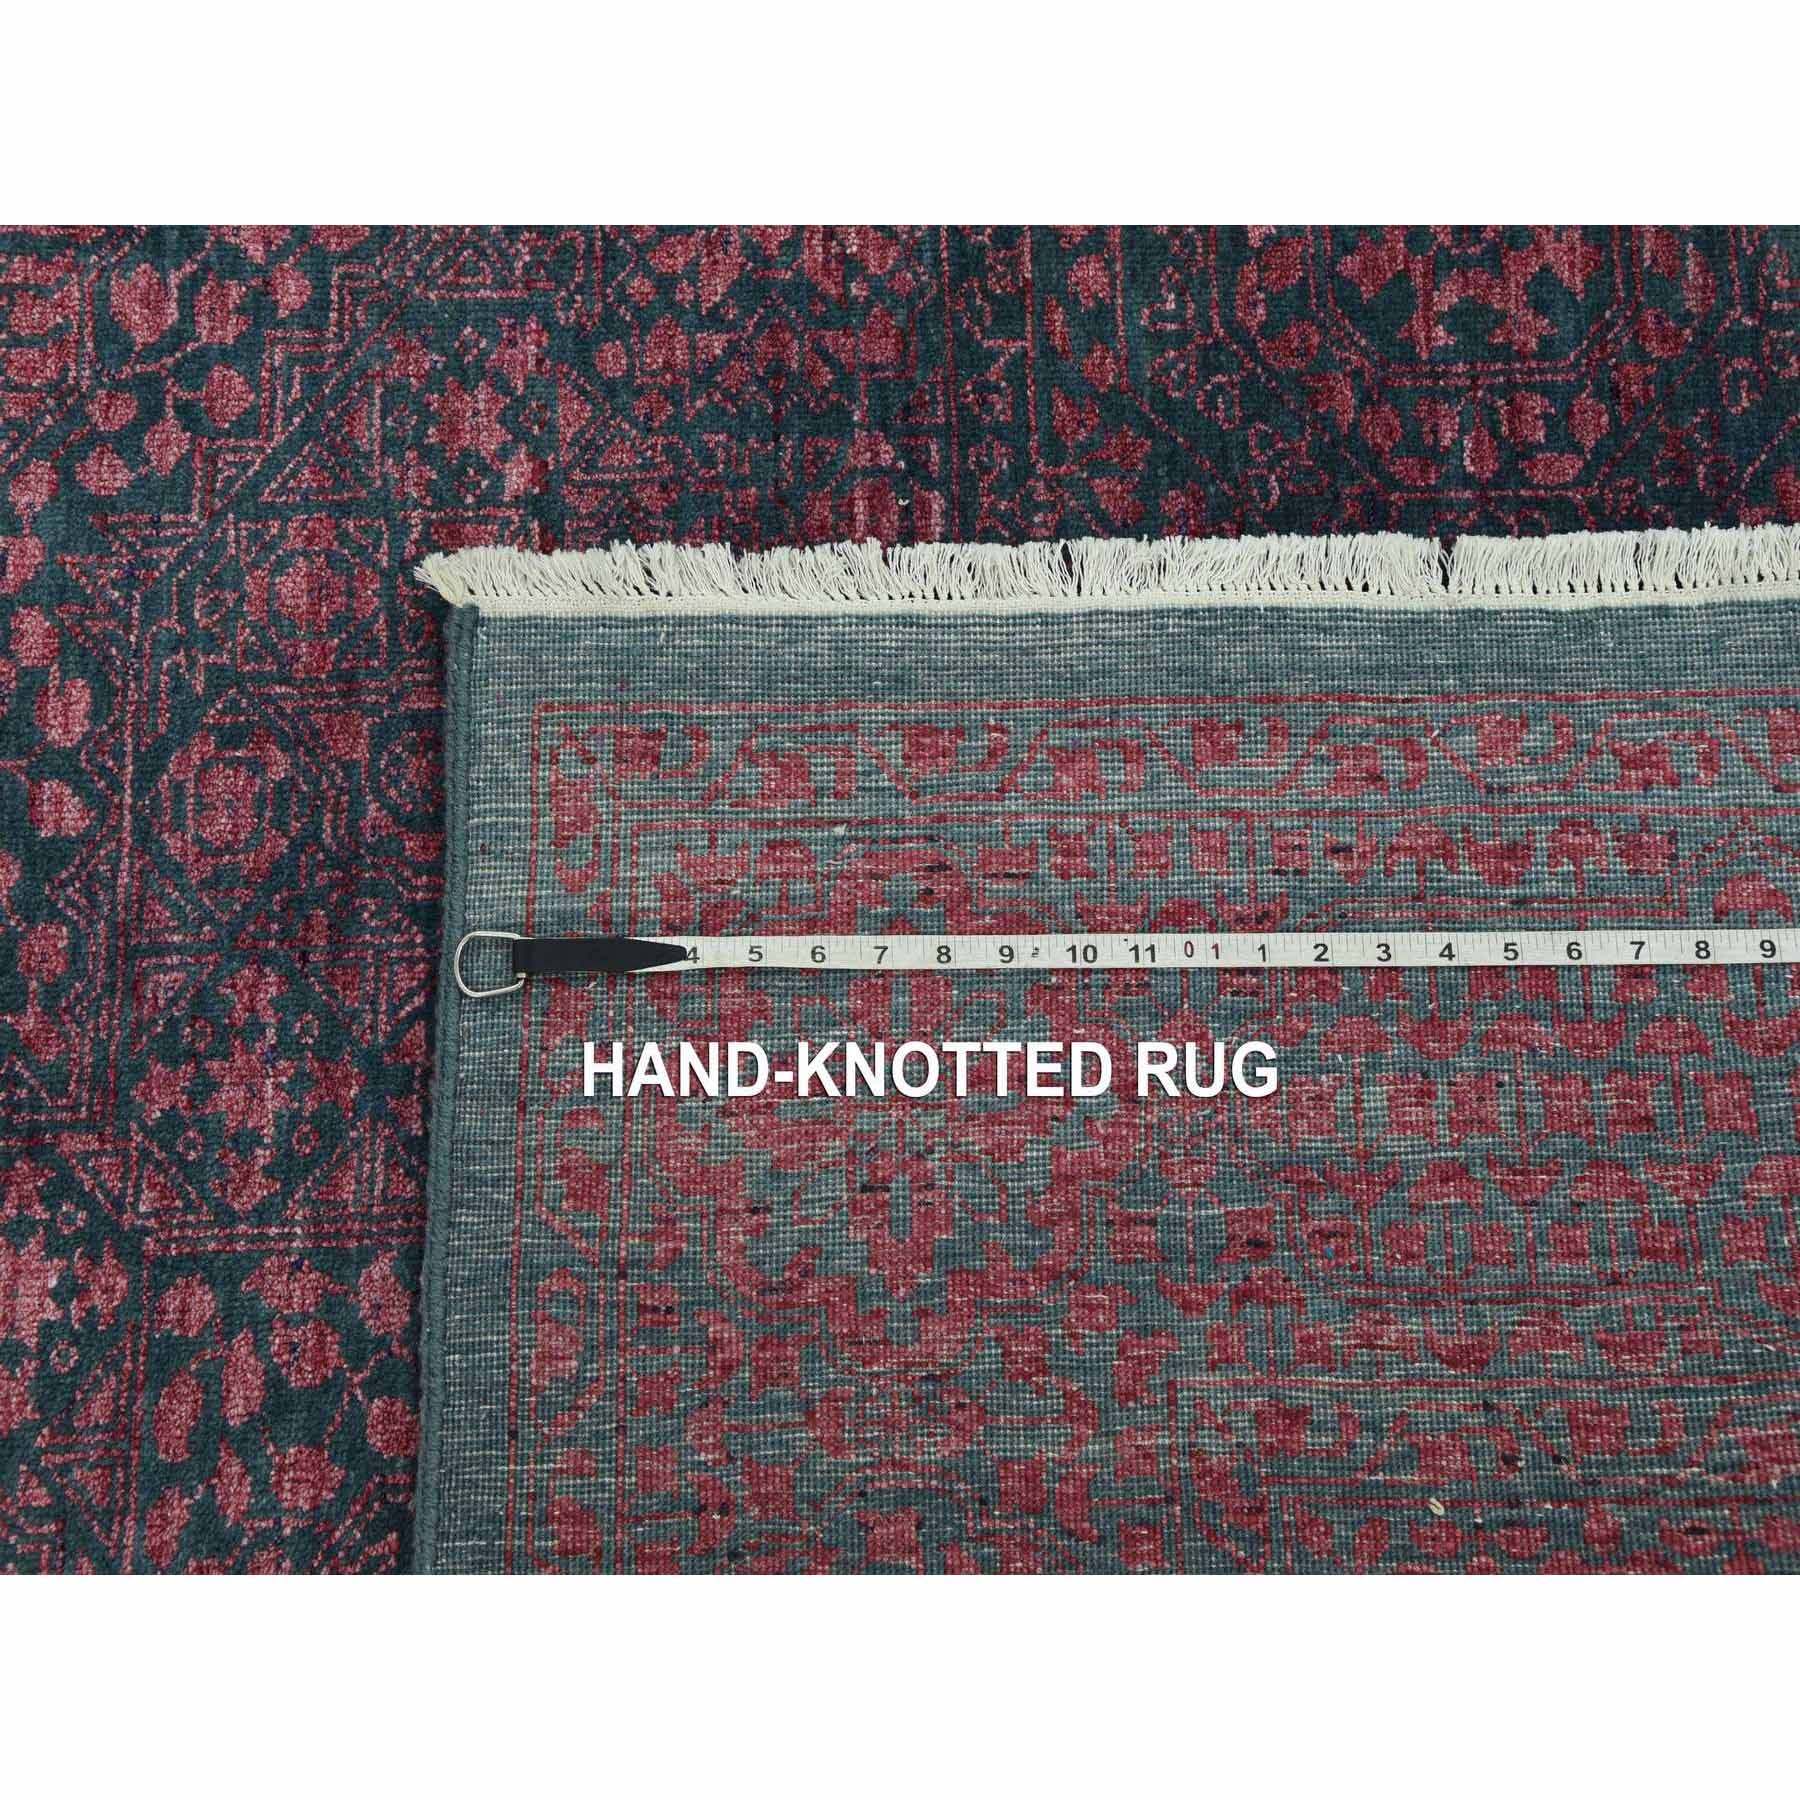 8'x9'9" Dark Green with Pop of Red, Obscured, Tone on Tone Mamluk Design, Wool and Silk Hand Woven, Oriental Rug 